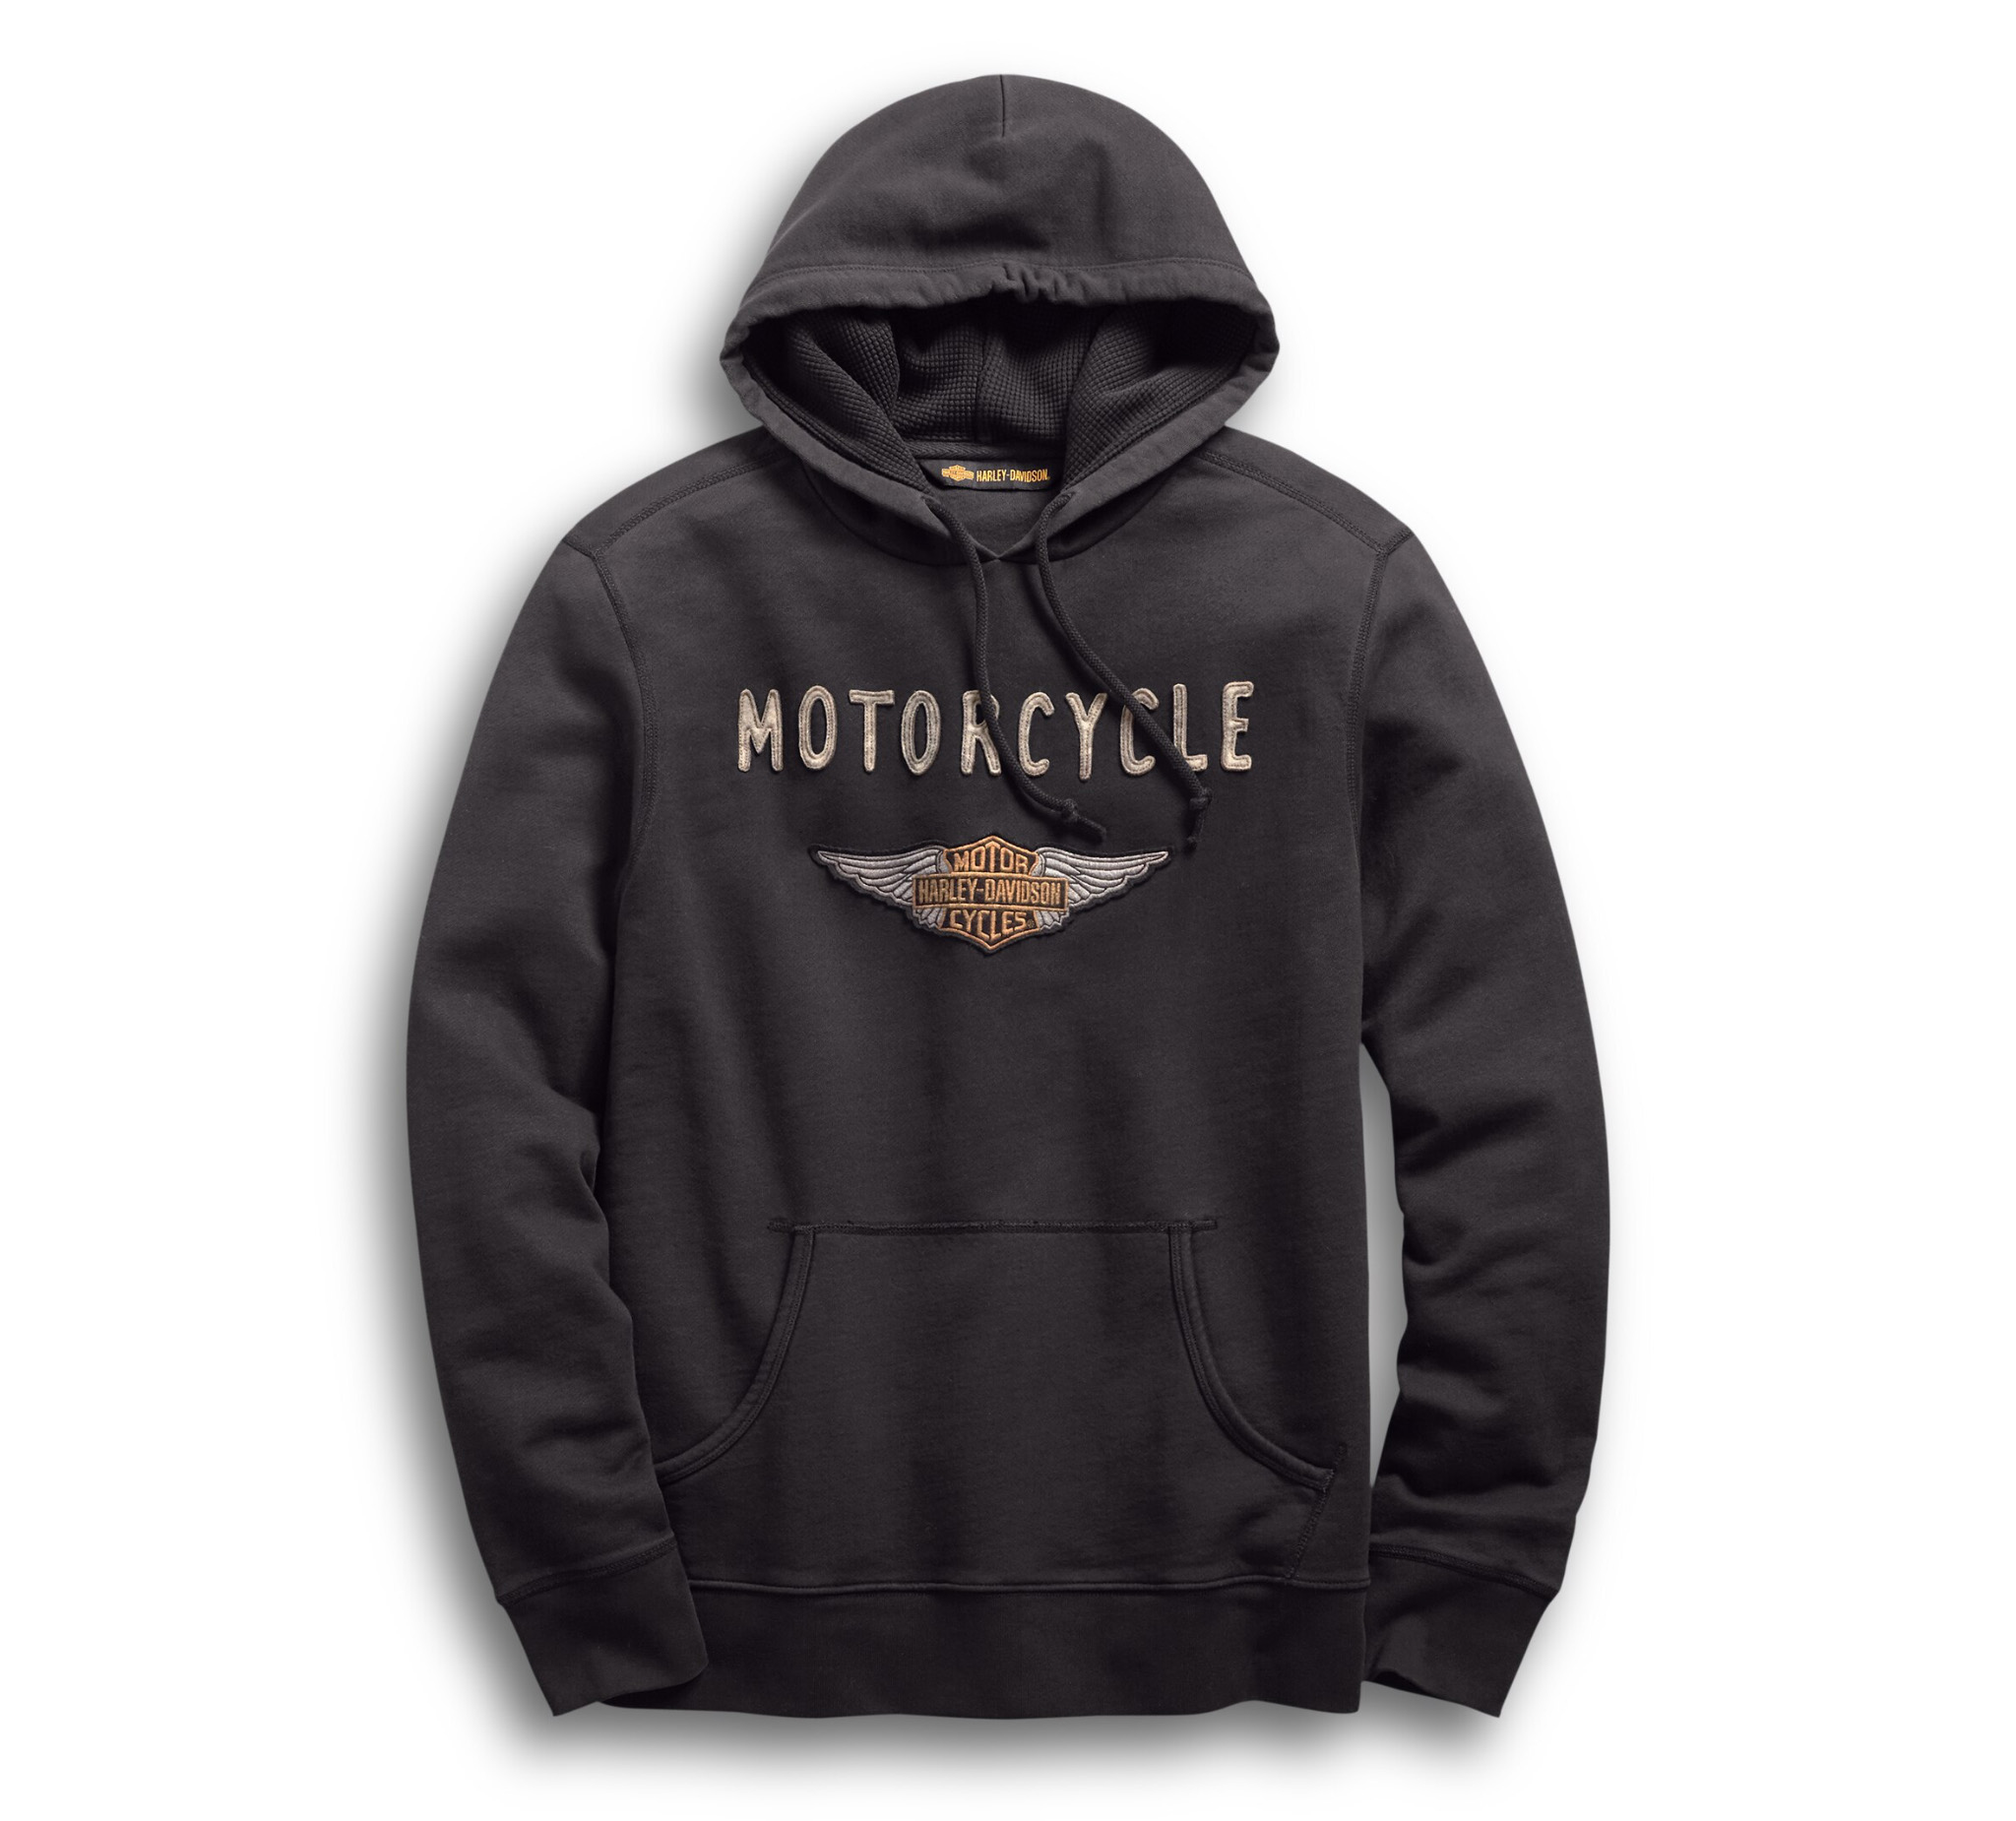 Vintage Motorcycle Some Need Therapy Cruiser Graphic Hoodie for Men